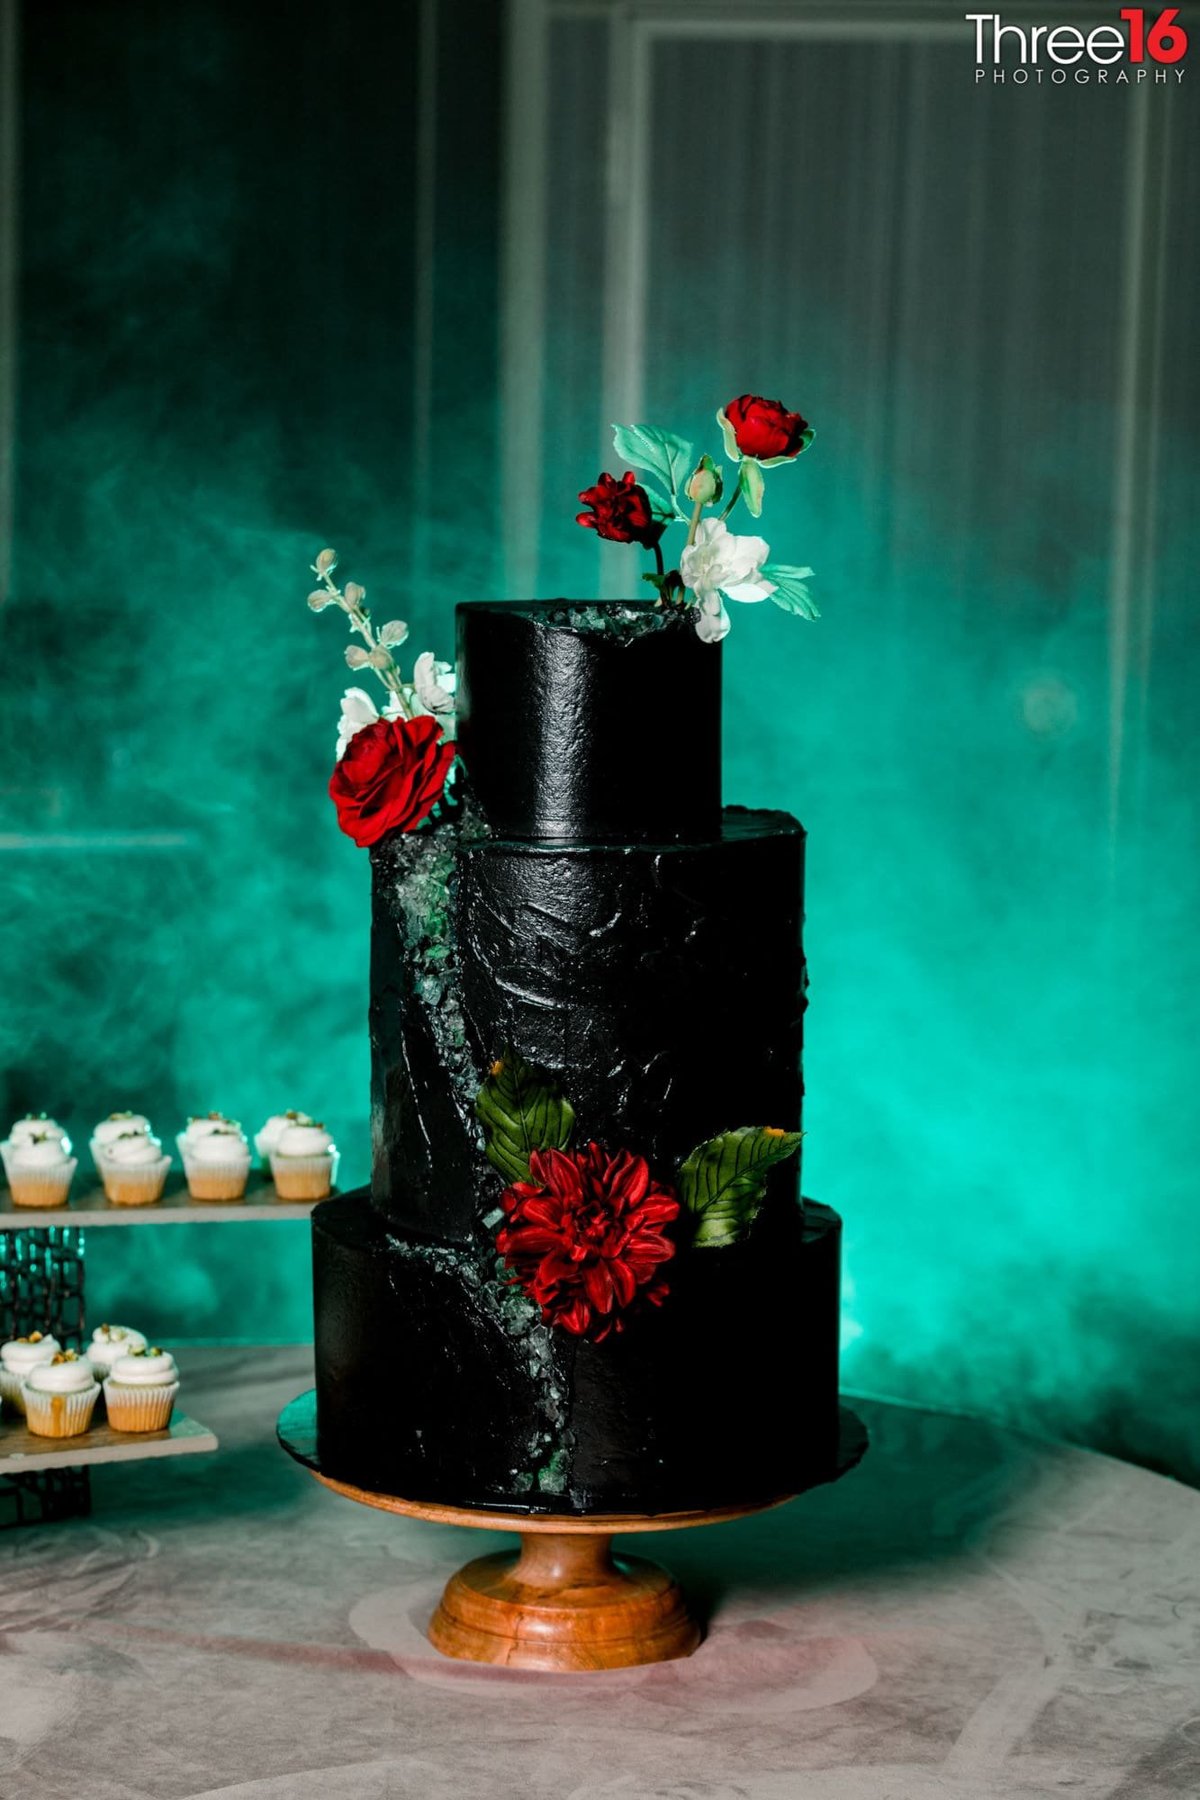 Amazing 3-tiered black wedding cake accented by red roses